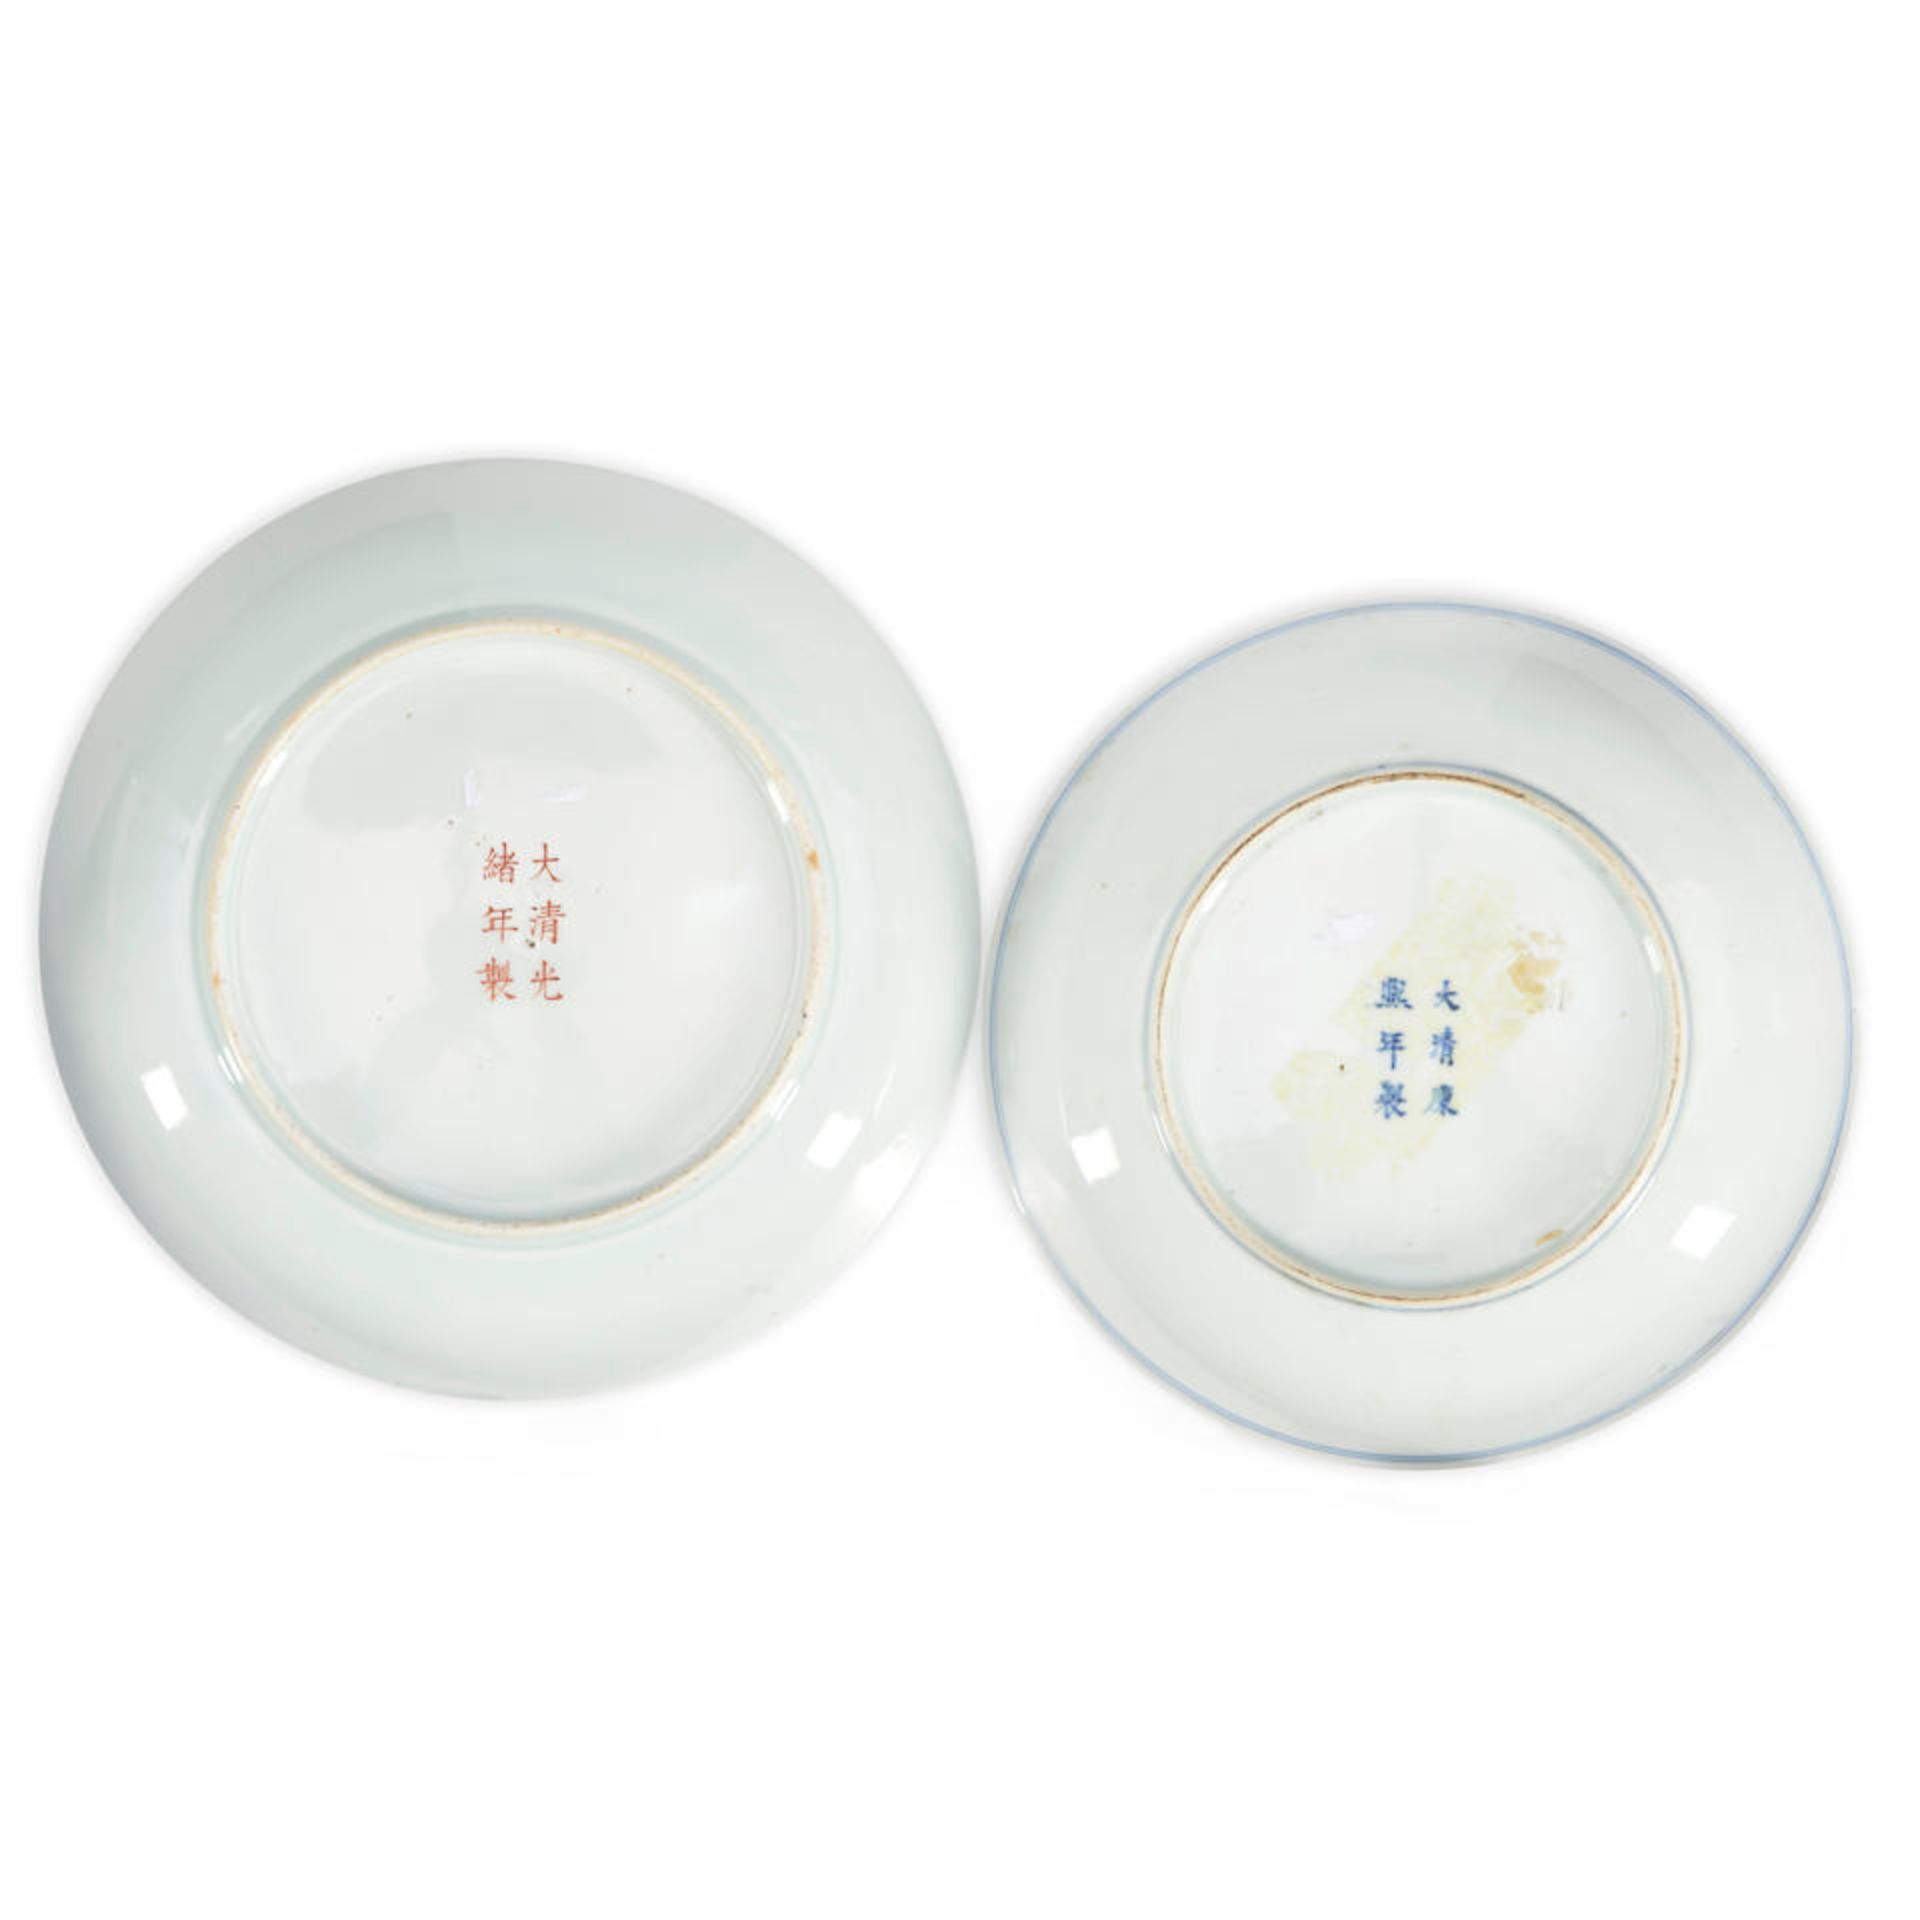 TWO DRAGON-MOTIF DISHES - Image 2 of 2